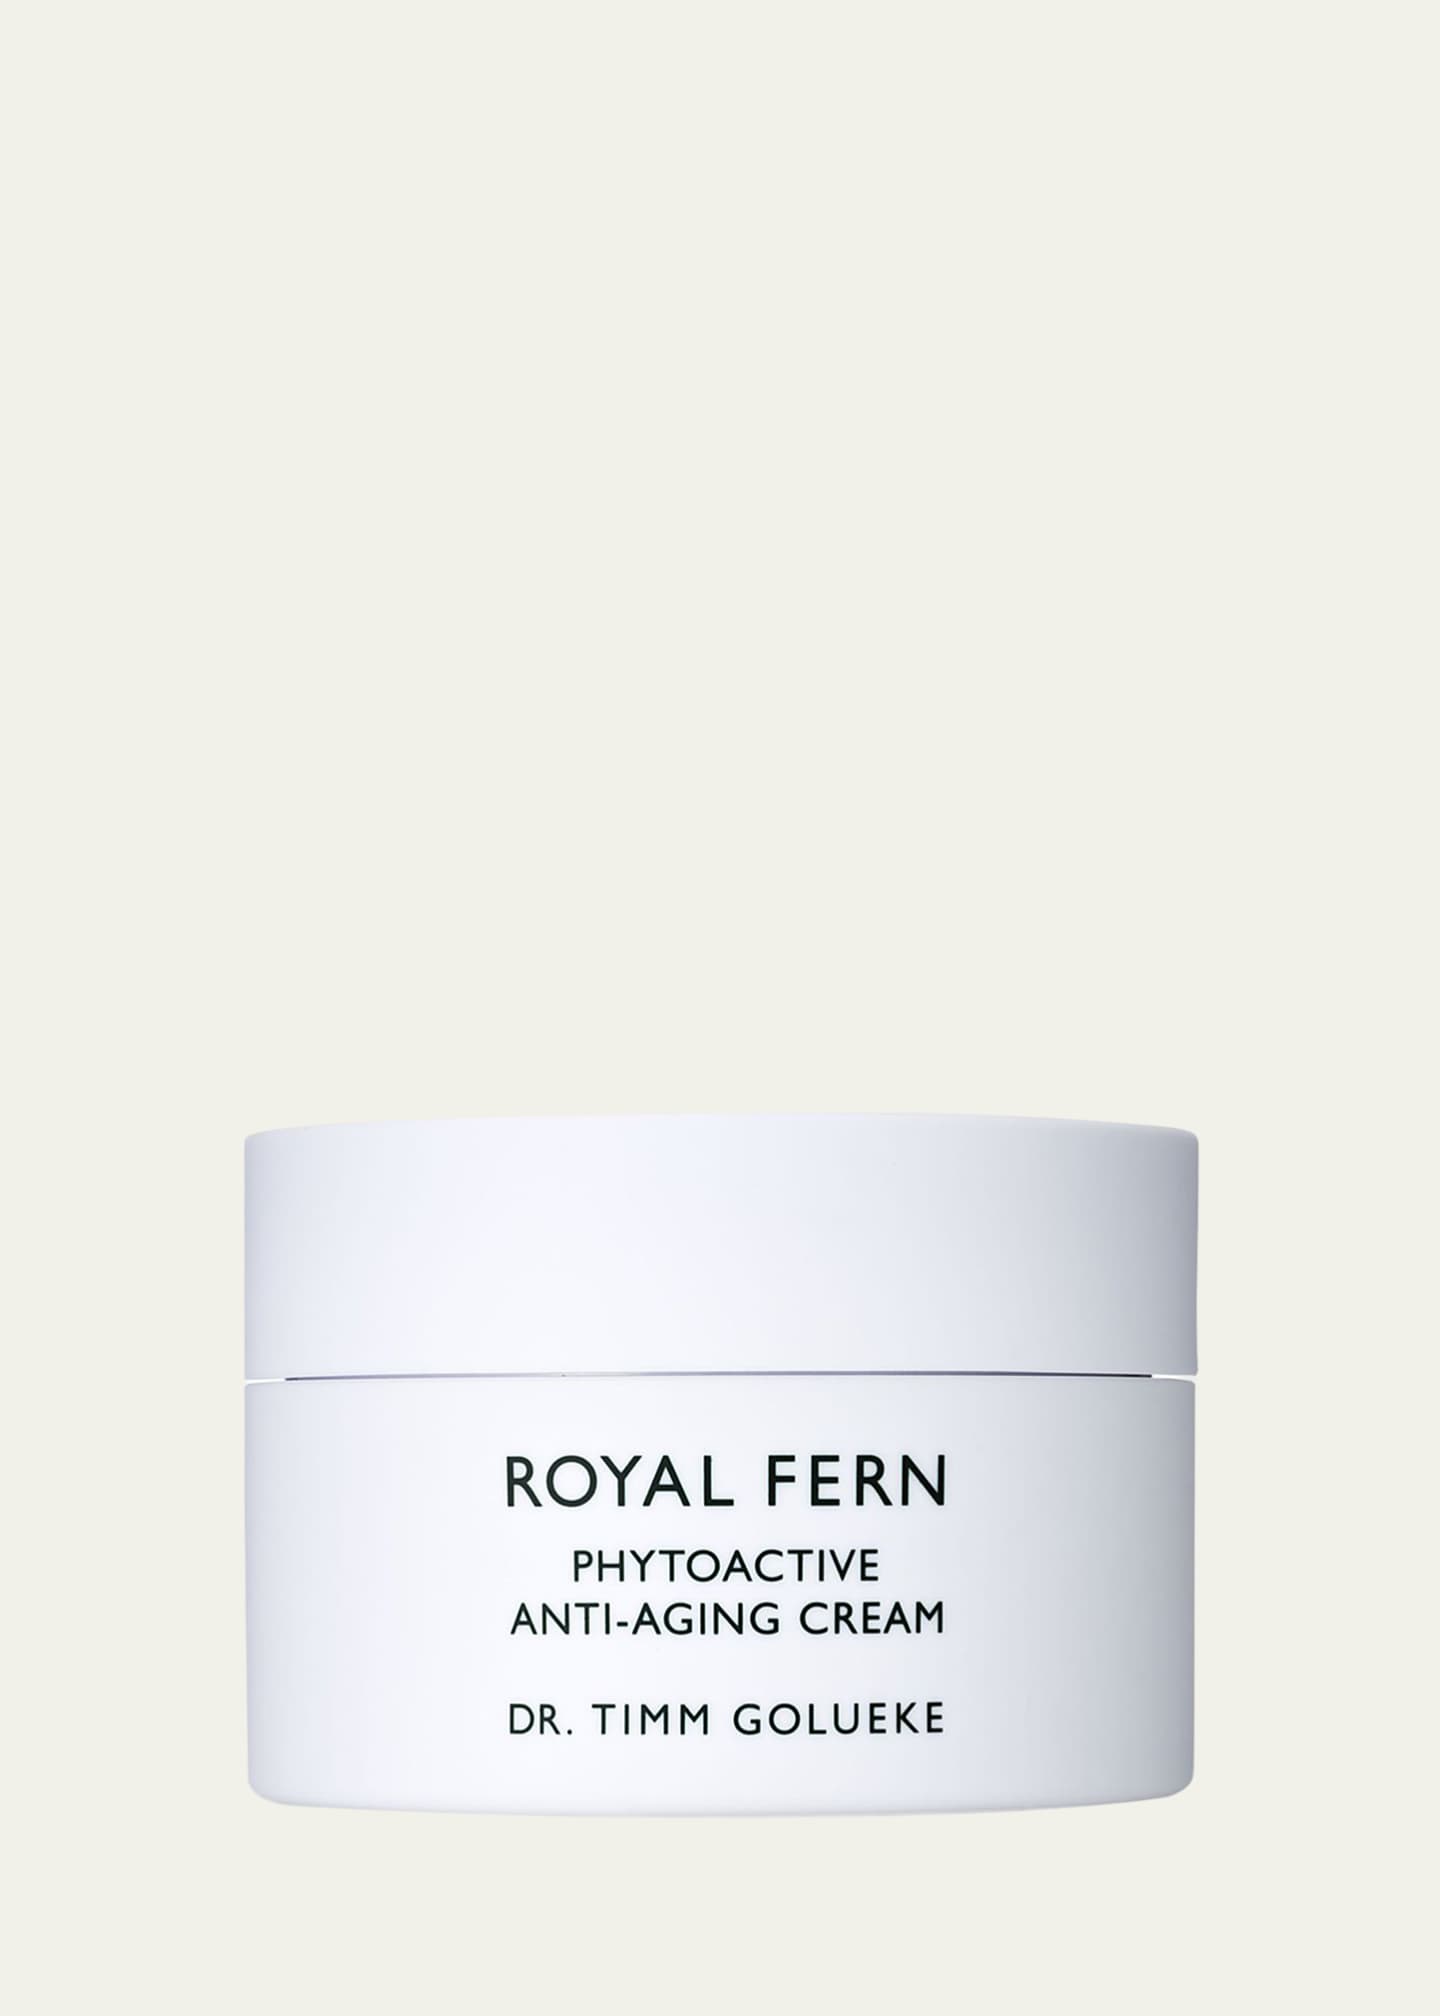 Royal Fern Phytoactive Antiaging Cream, 1.7 oz. Image 1 of 2